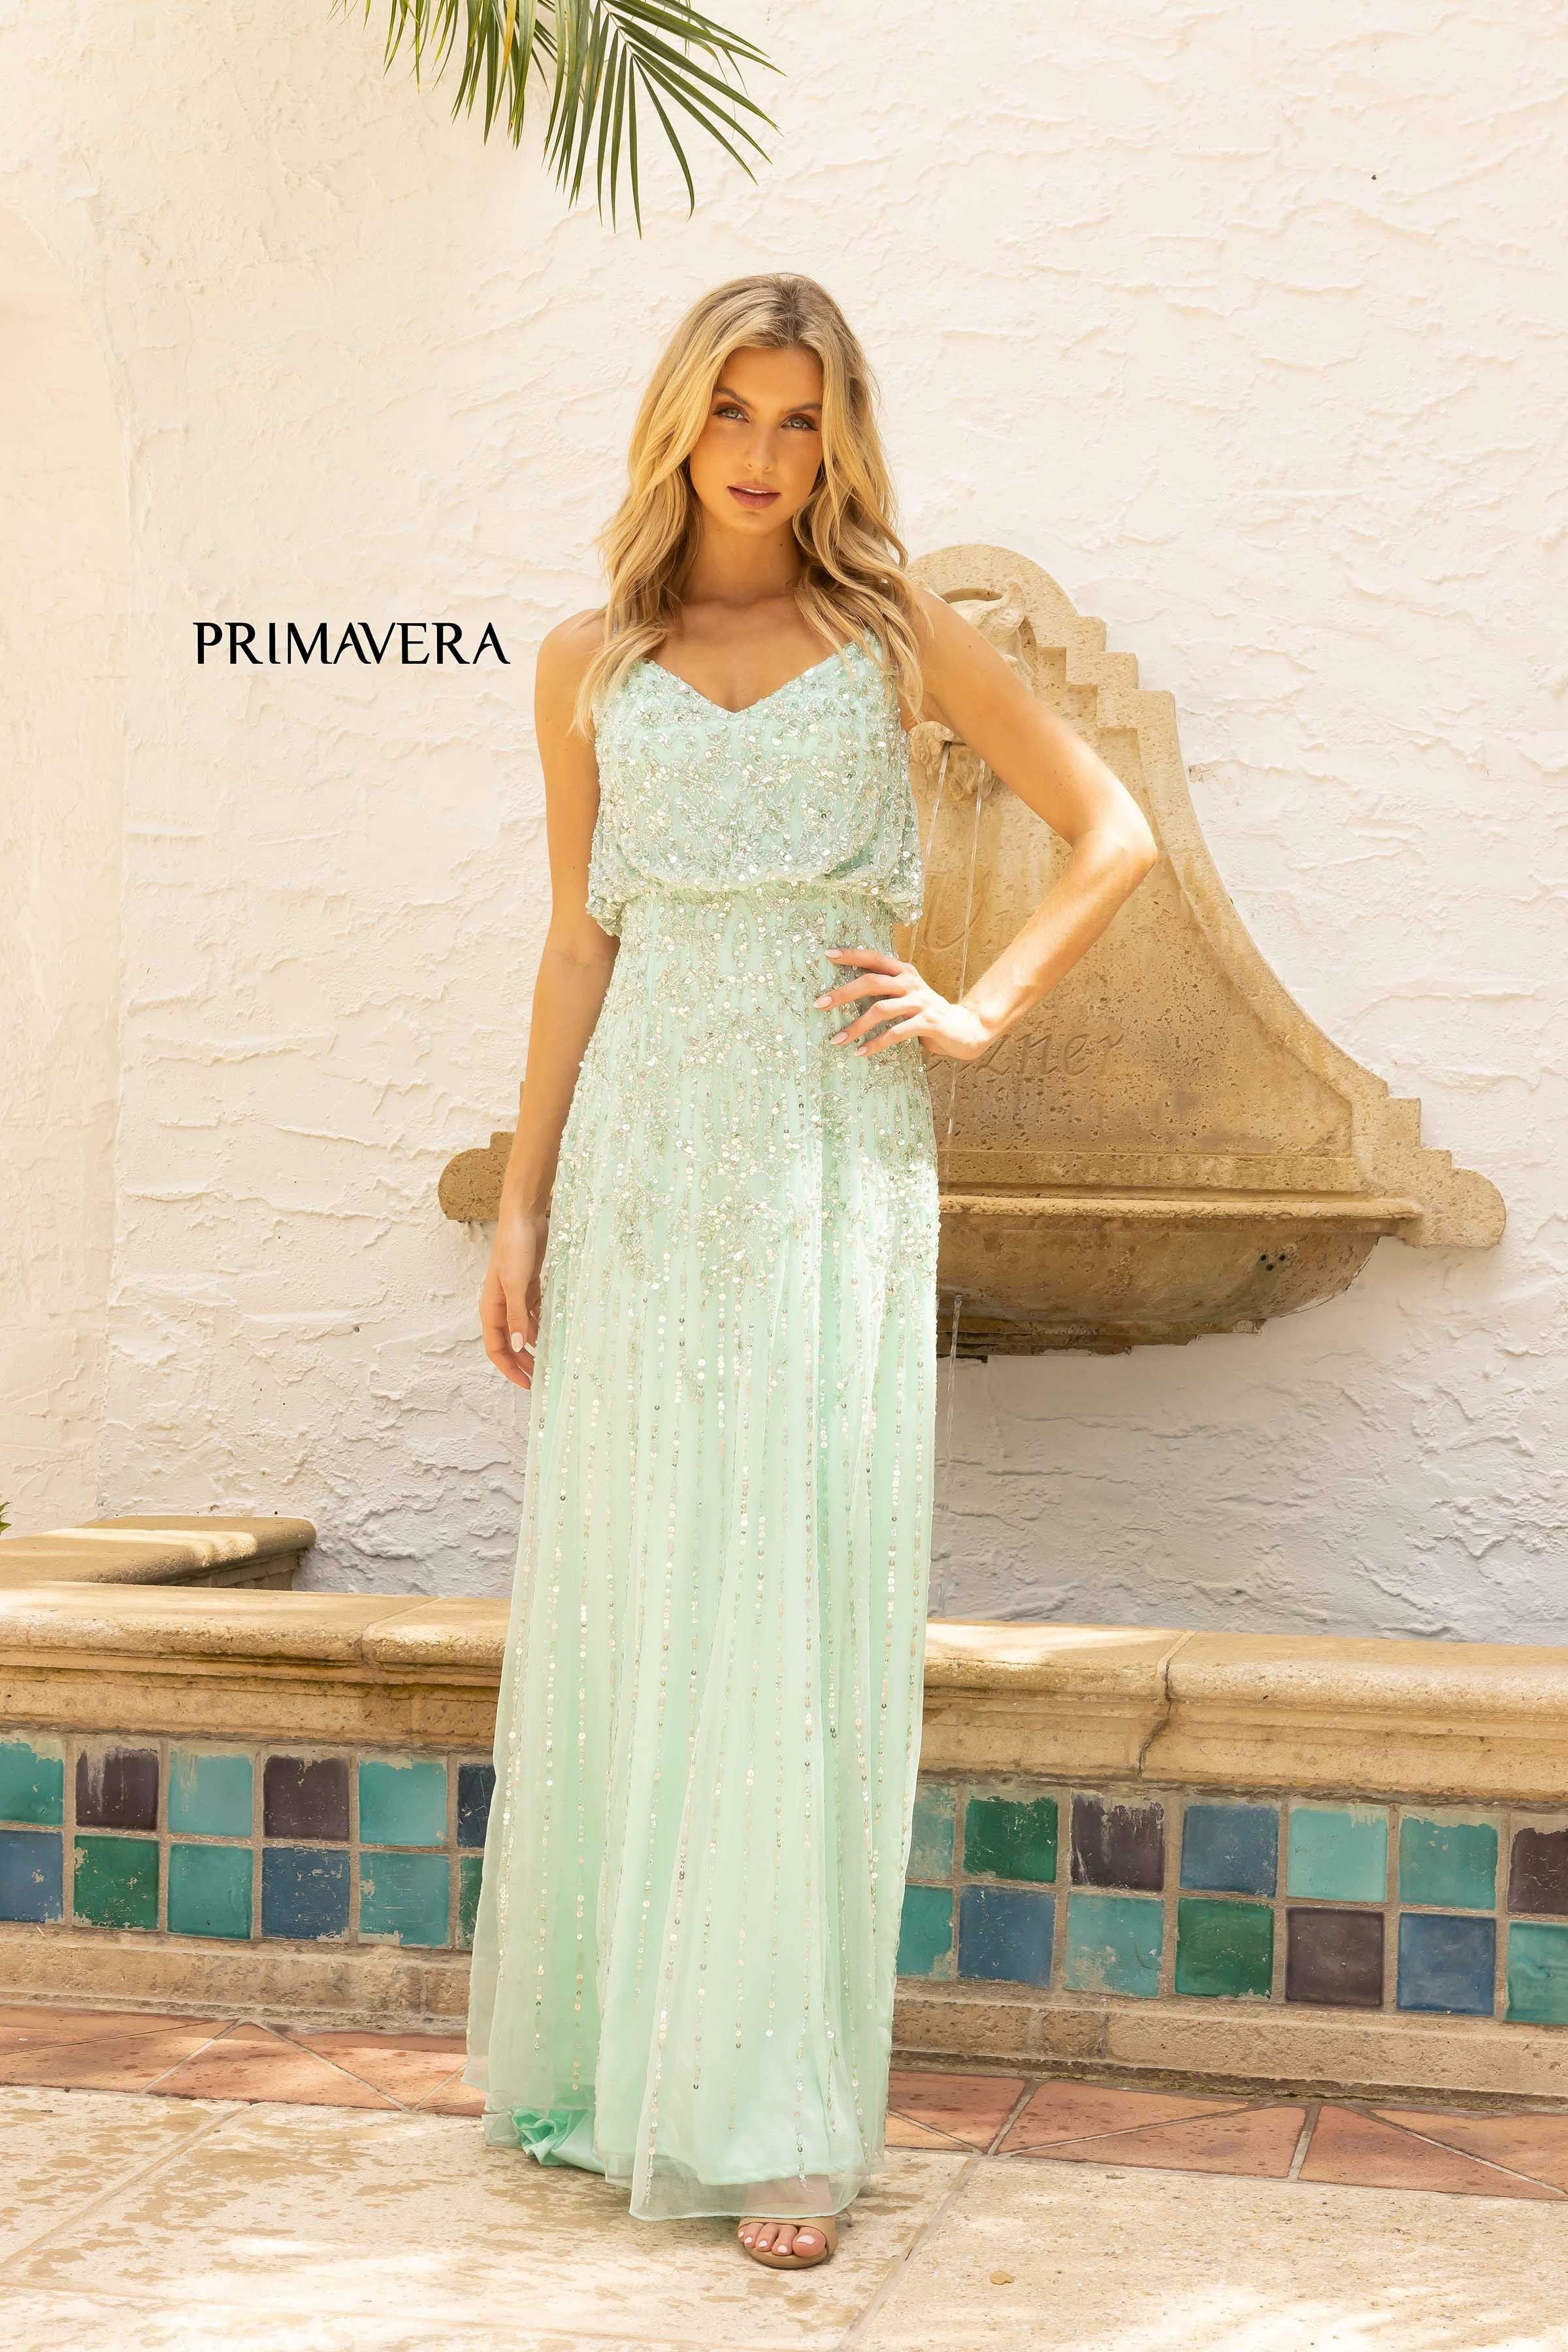 Blouson Sleeveless Chic Gown By Primavera Couture -13104